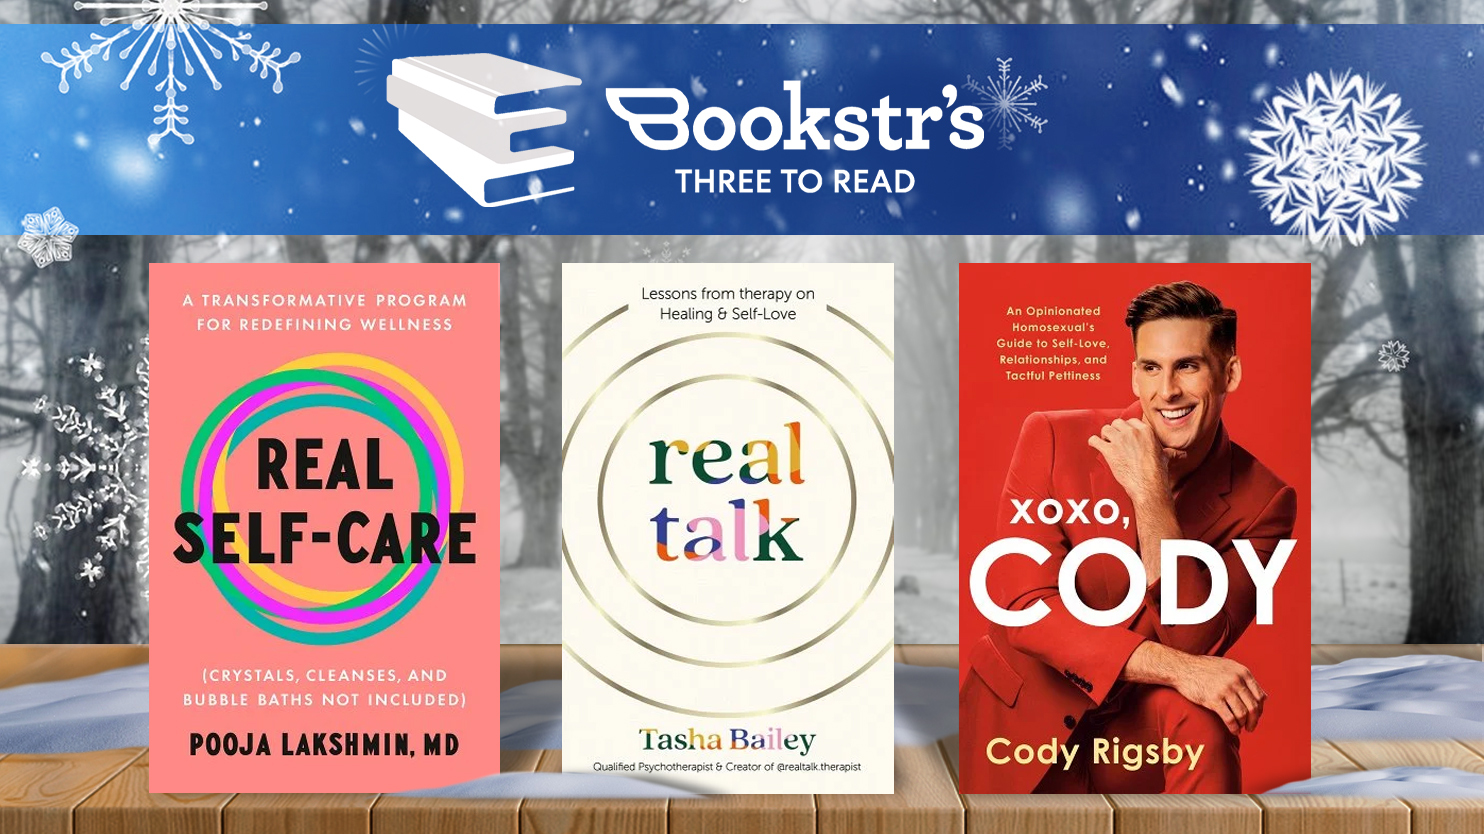 Real Self-Care cover by Pooja Lakshmin, Real Talk cover by Tasha Bailey, and Xoxo, Cody cover by Cody Rigsby under a snowy Bookstr logo.